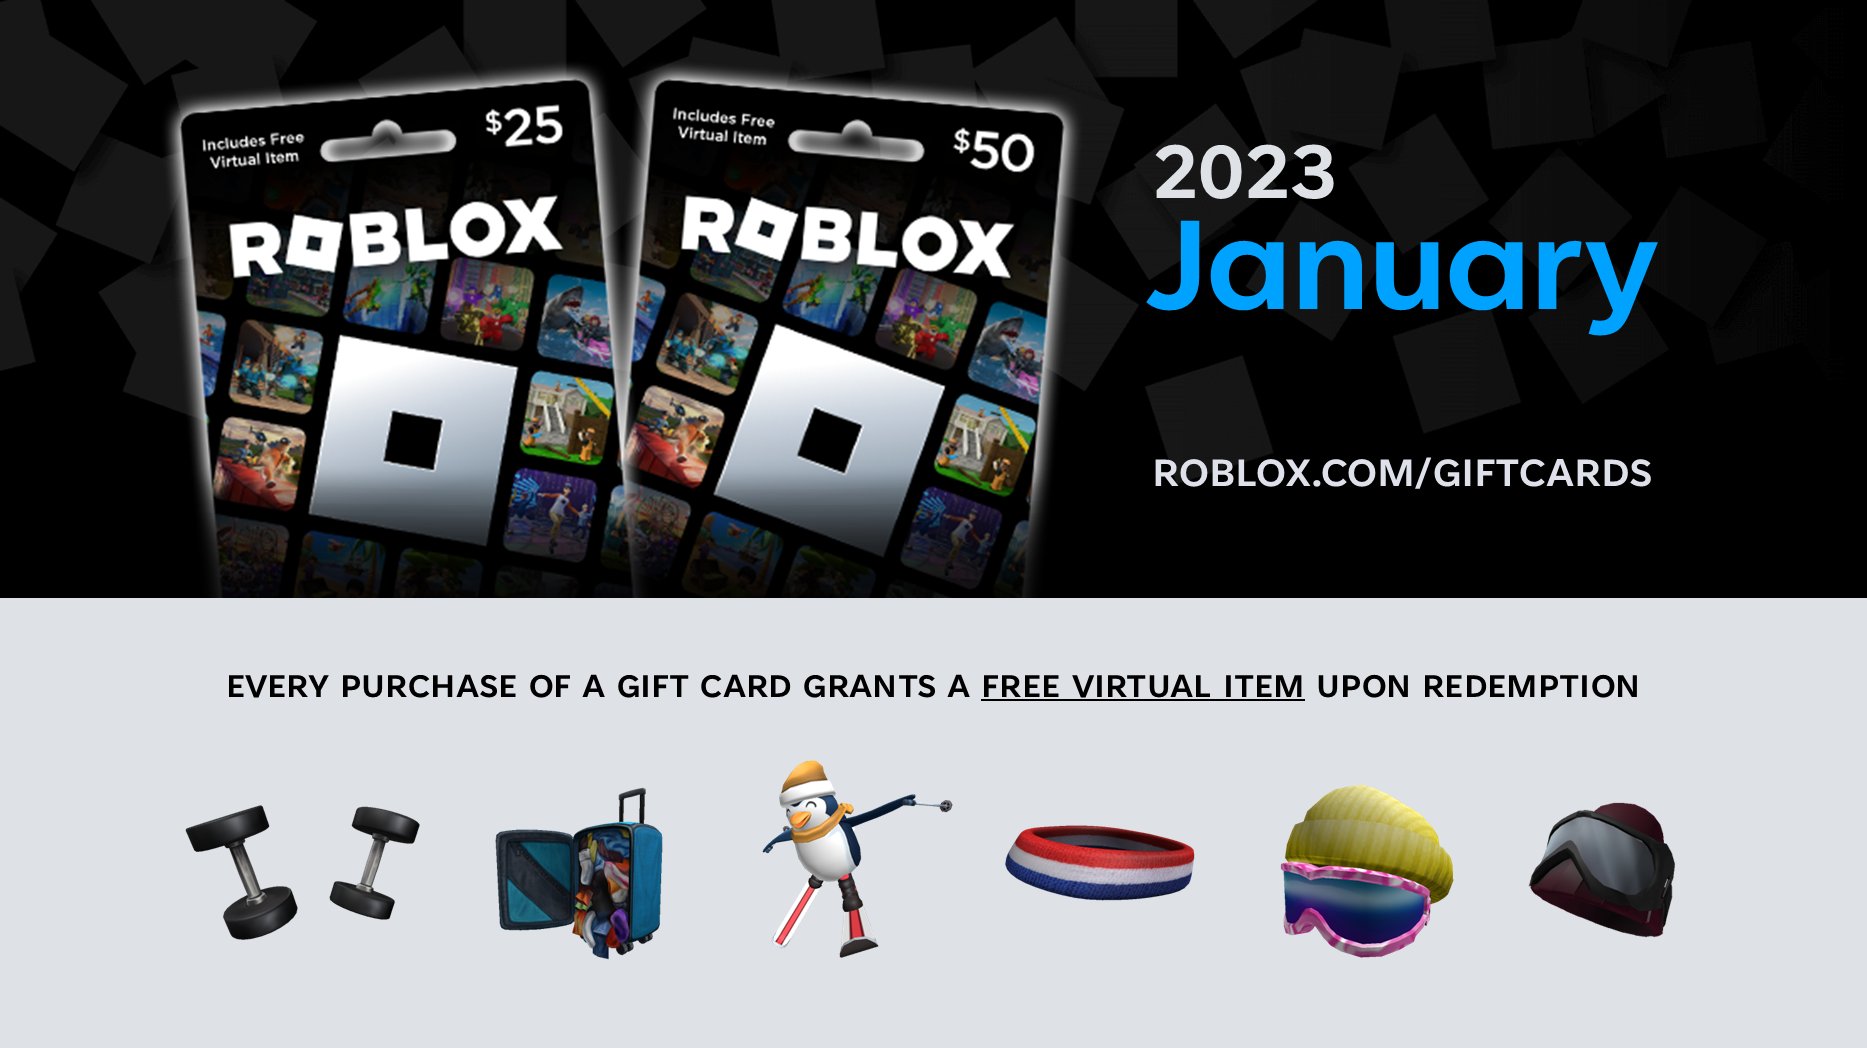 2023] Get Free Roblox Gift Vouchers - Limited Time Offer